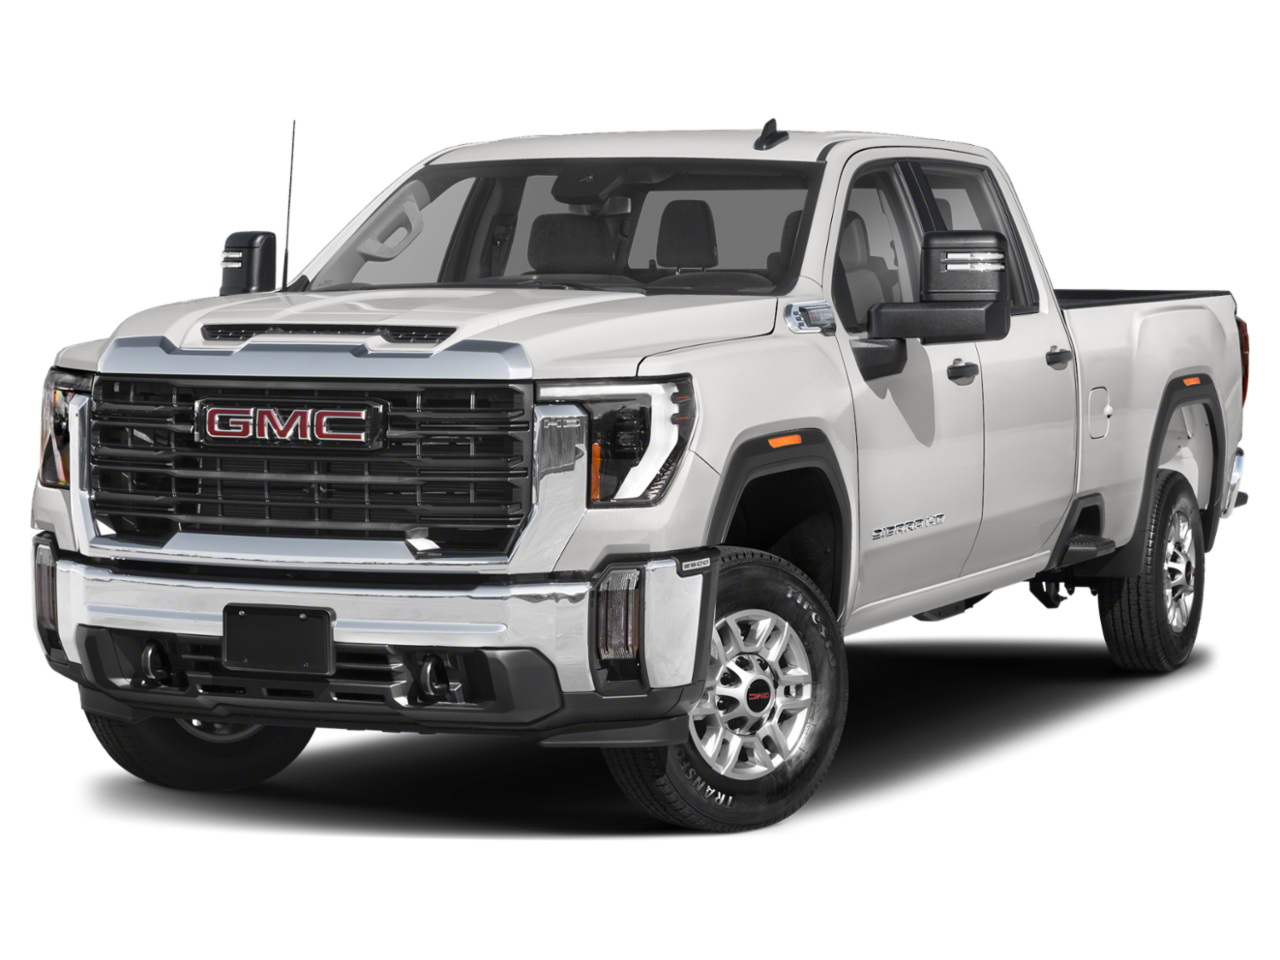 New GMC Sierra 2500 HD from your Collierville, TN dealership, Sunrise.